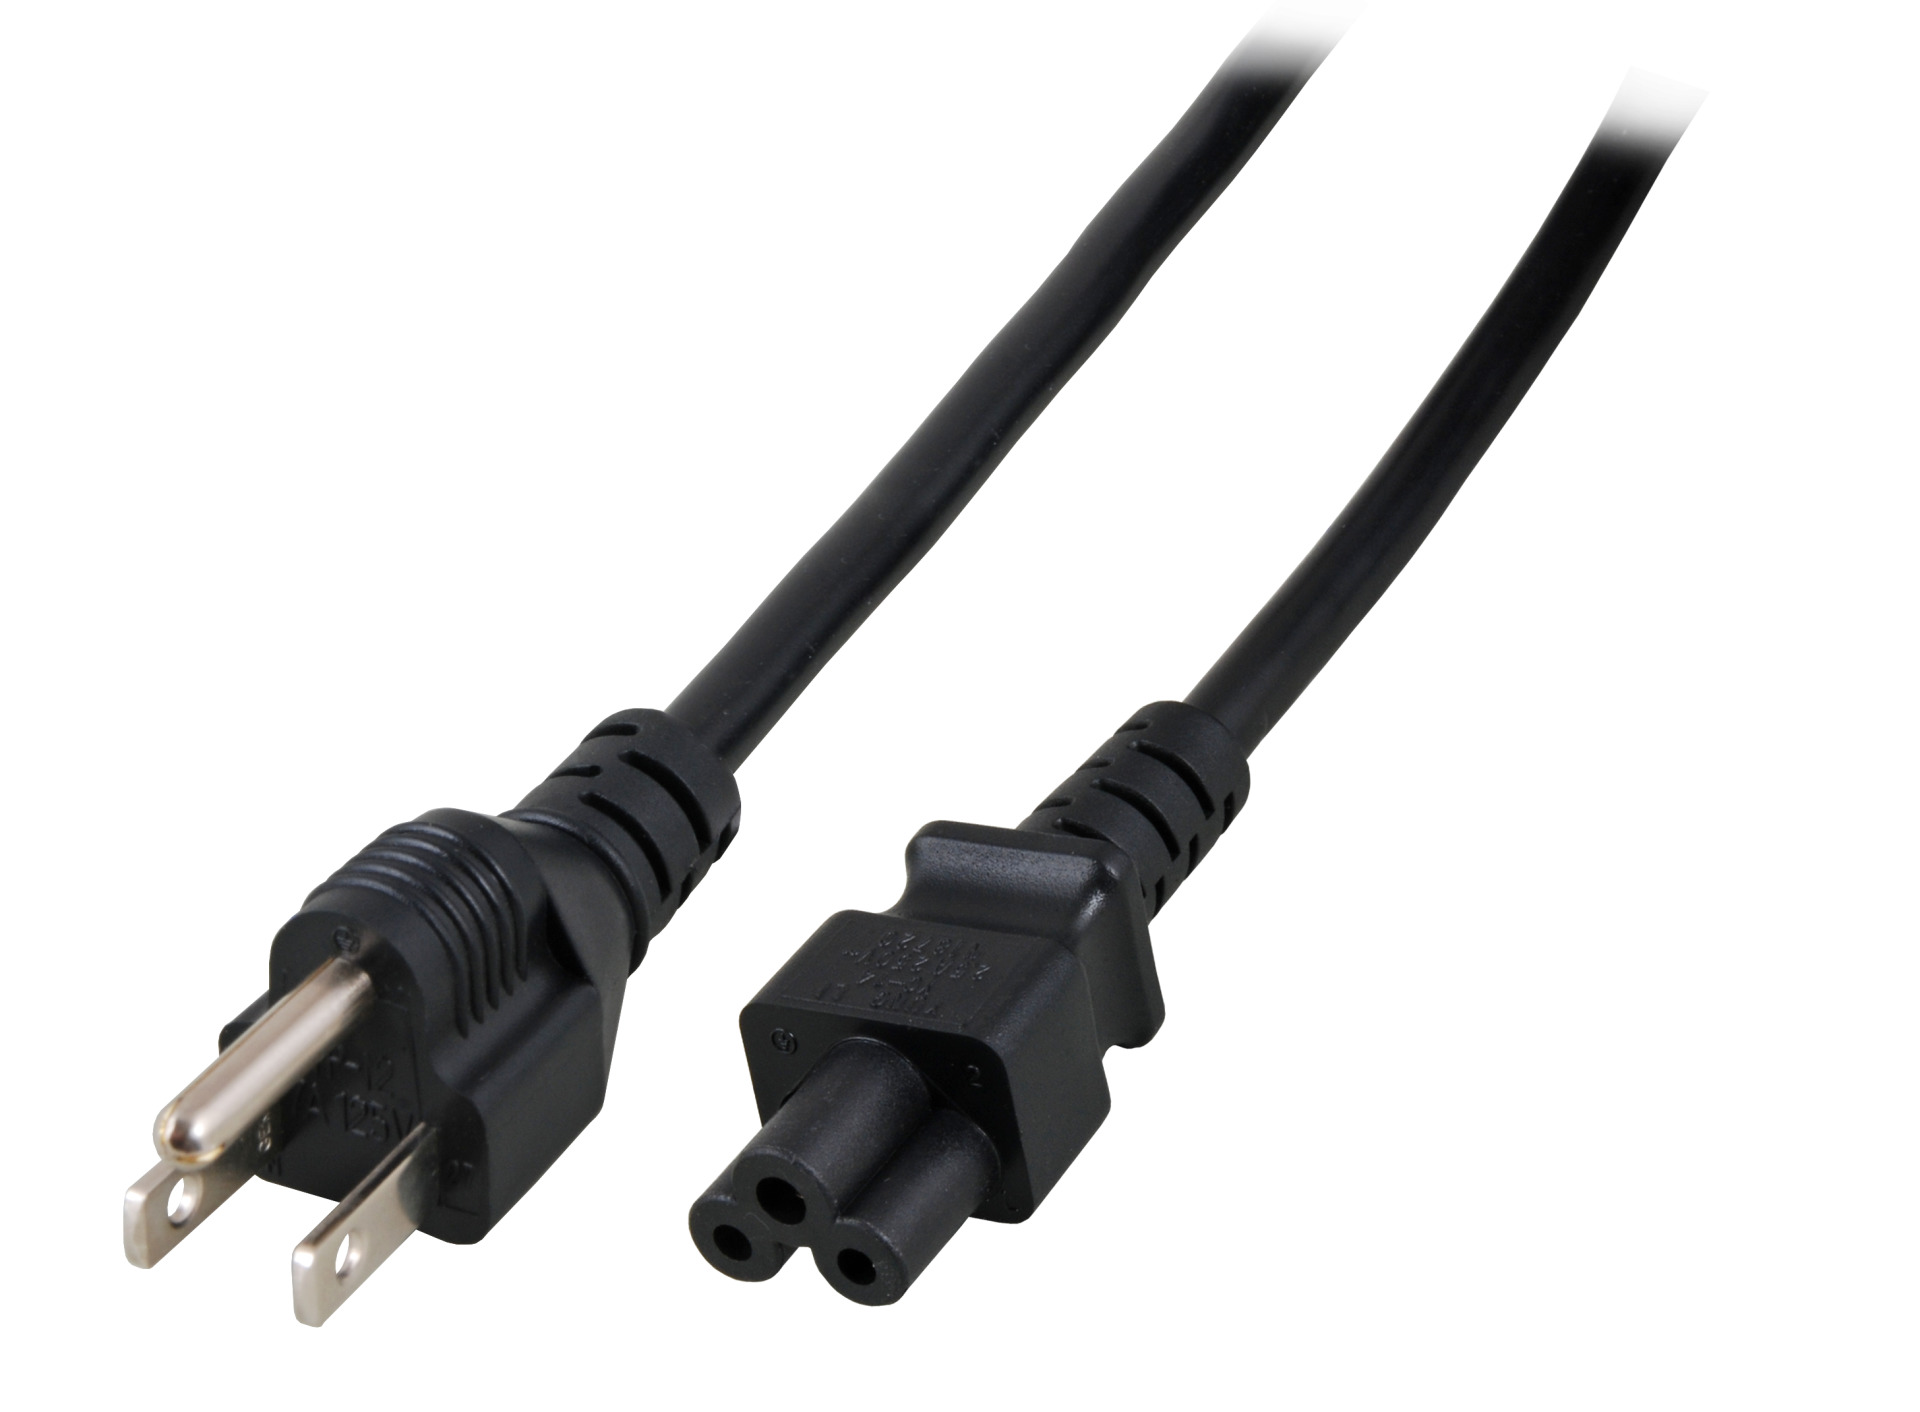 Power Cable Japan Type B - C5 180°, Black, 1.8 m, VCTF 3 x 0.75 mm²